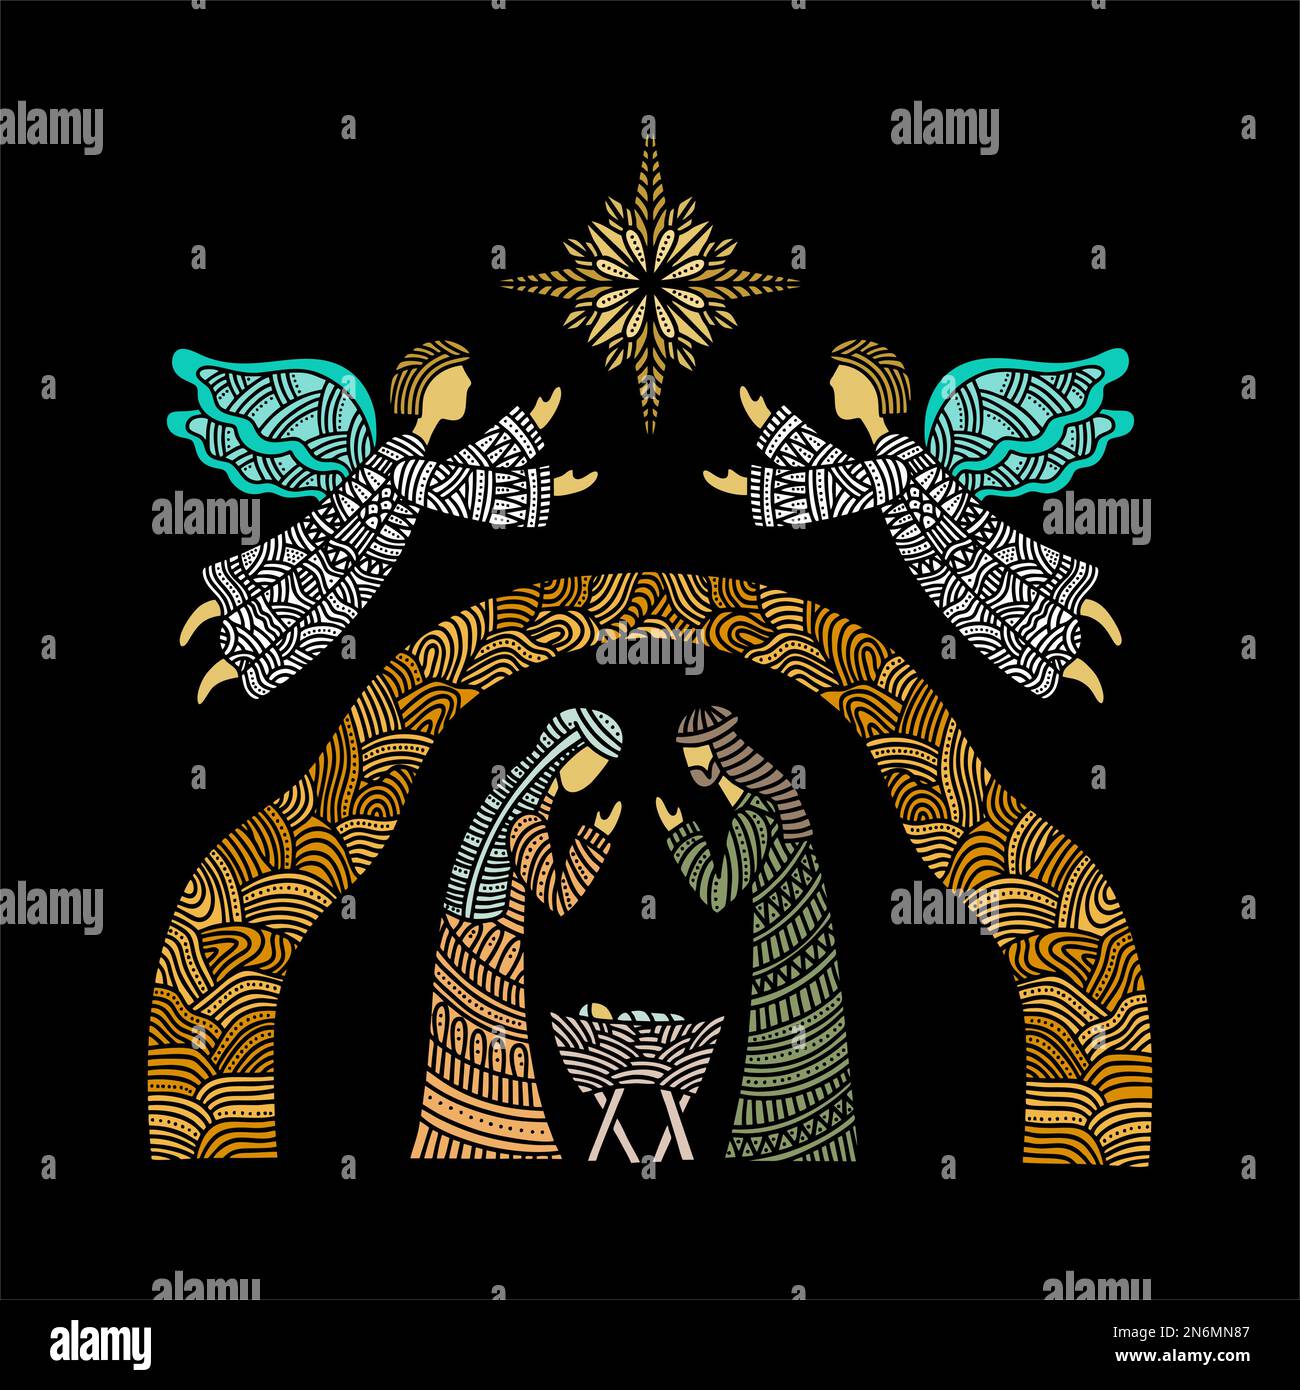 Doodle illustration. The Nativity scene. Joseph and Mary with the baby Jesus. Angels point to the star of Bethlehem. Stock Vector